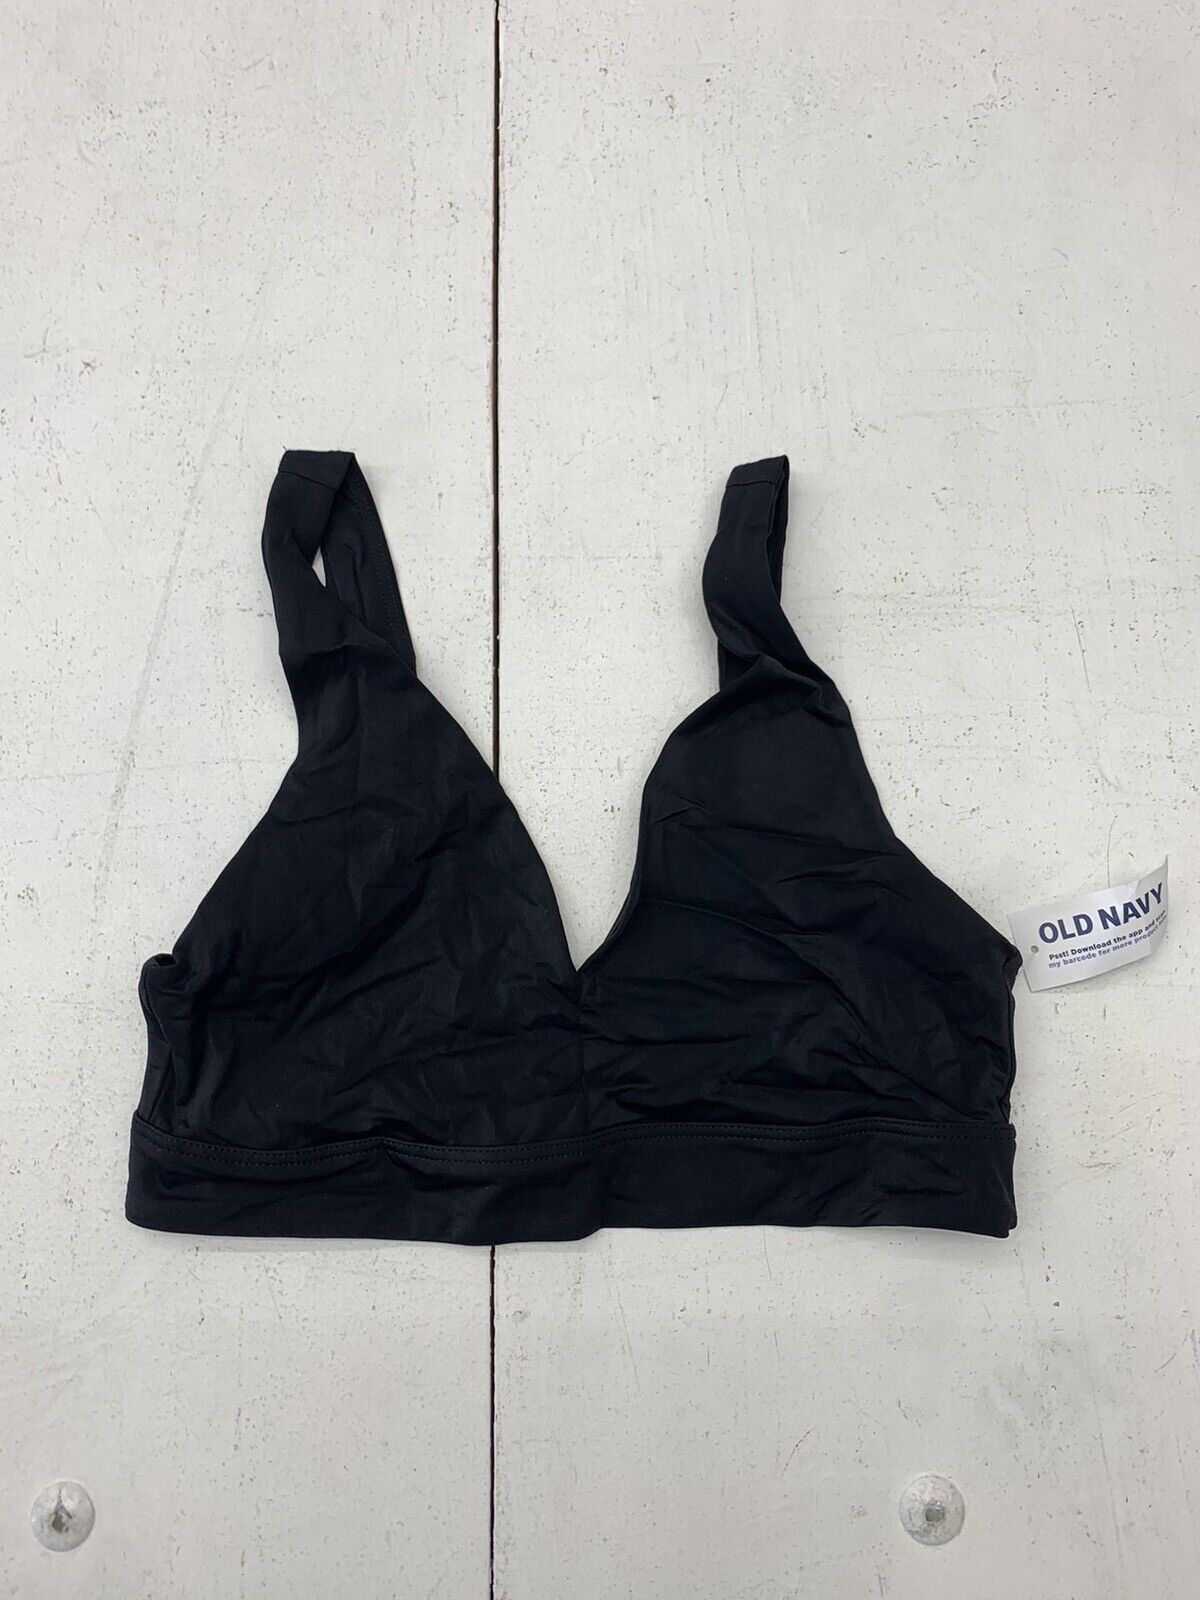 Old Navy Womens Black Bra Size Small